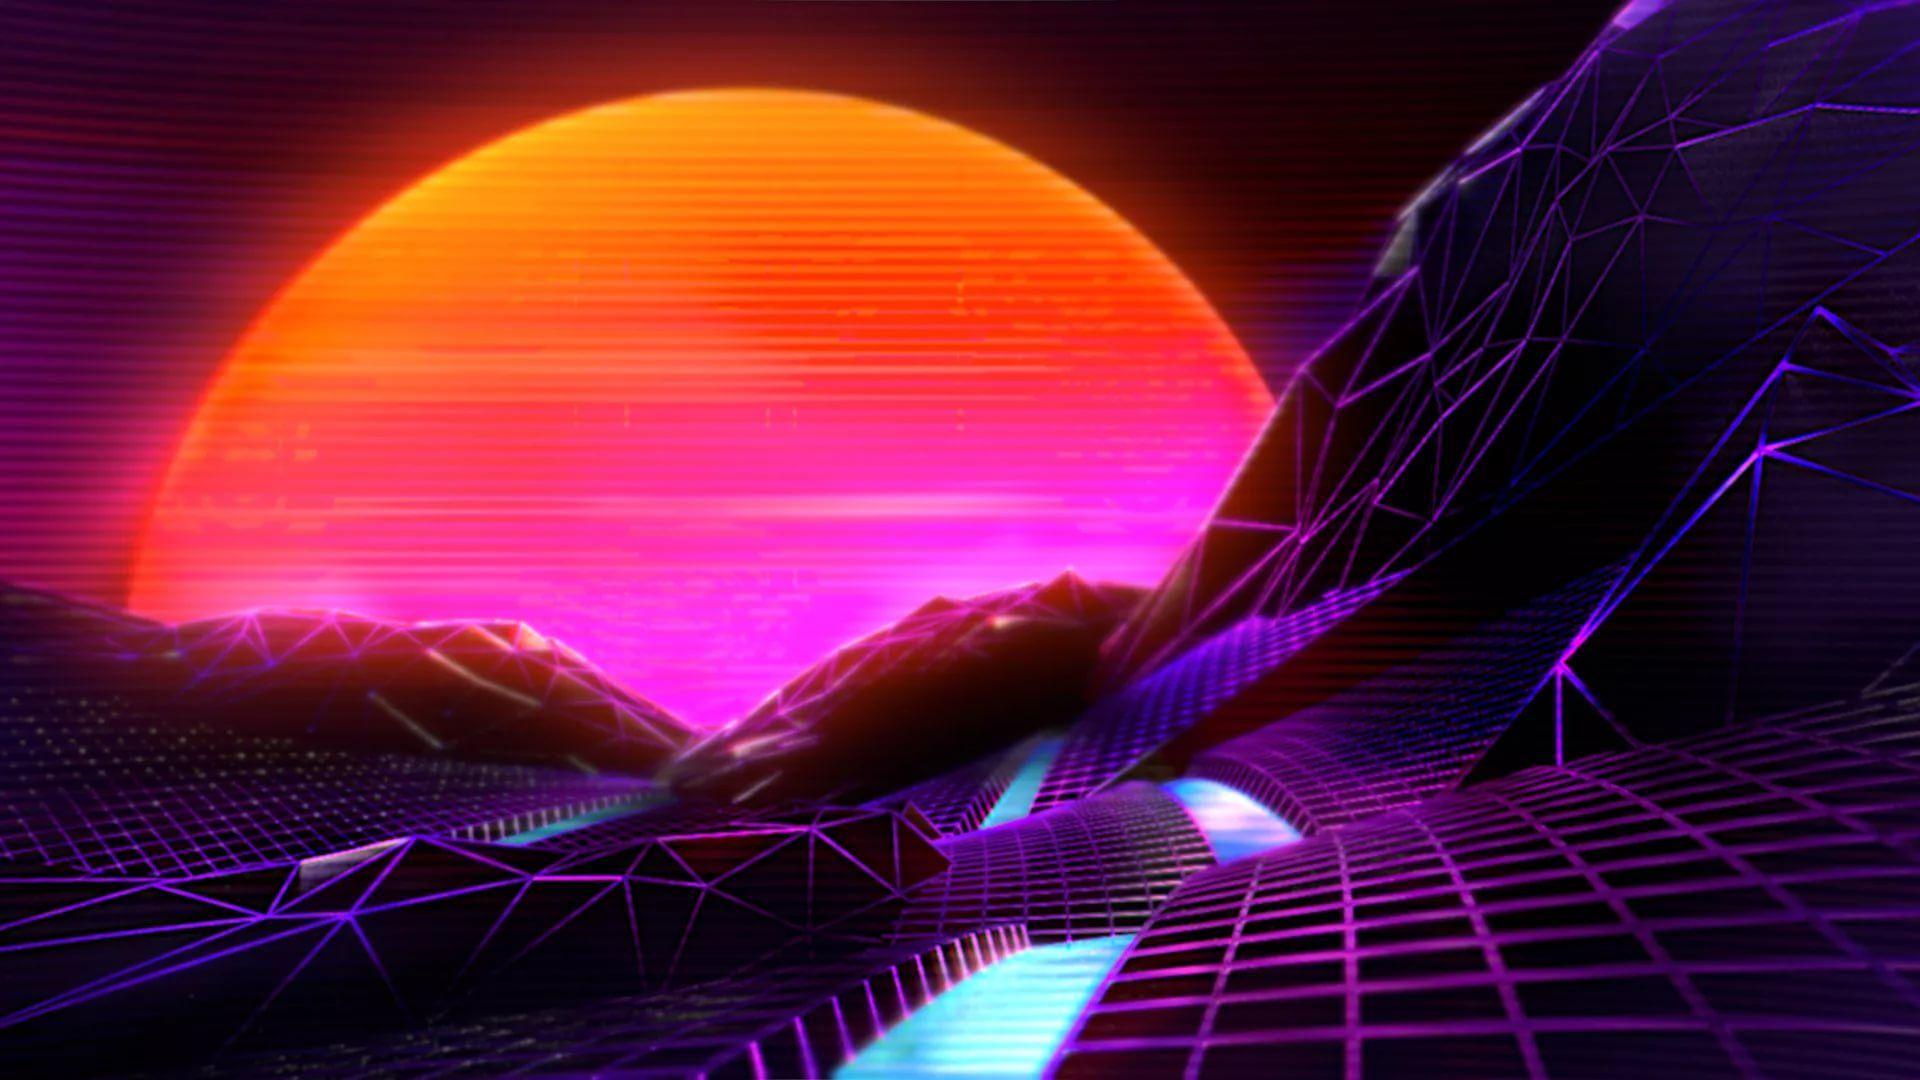 1920 x 1080 · jpeg - Synthwave Full Hd Wallpaper For Laptop - Hd Synthwave - 1920x1080 ...